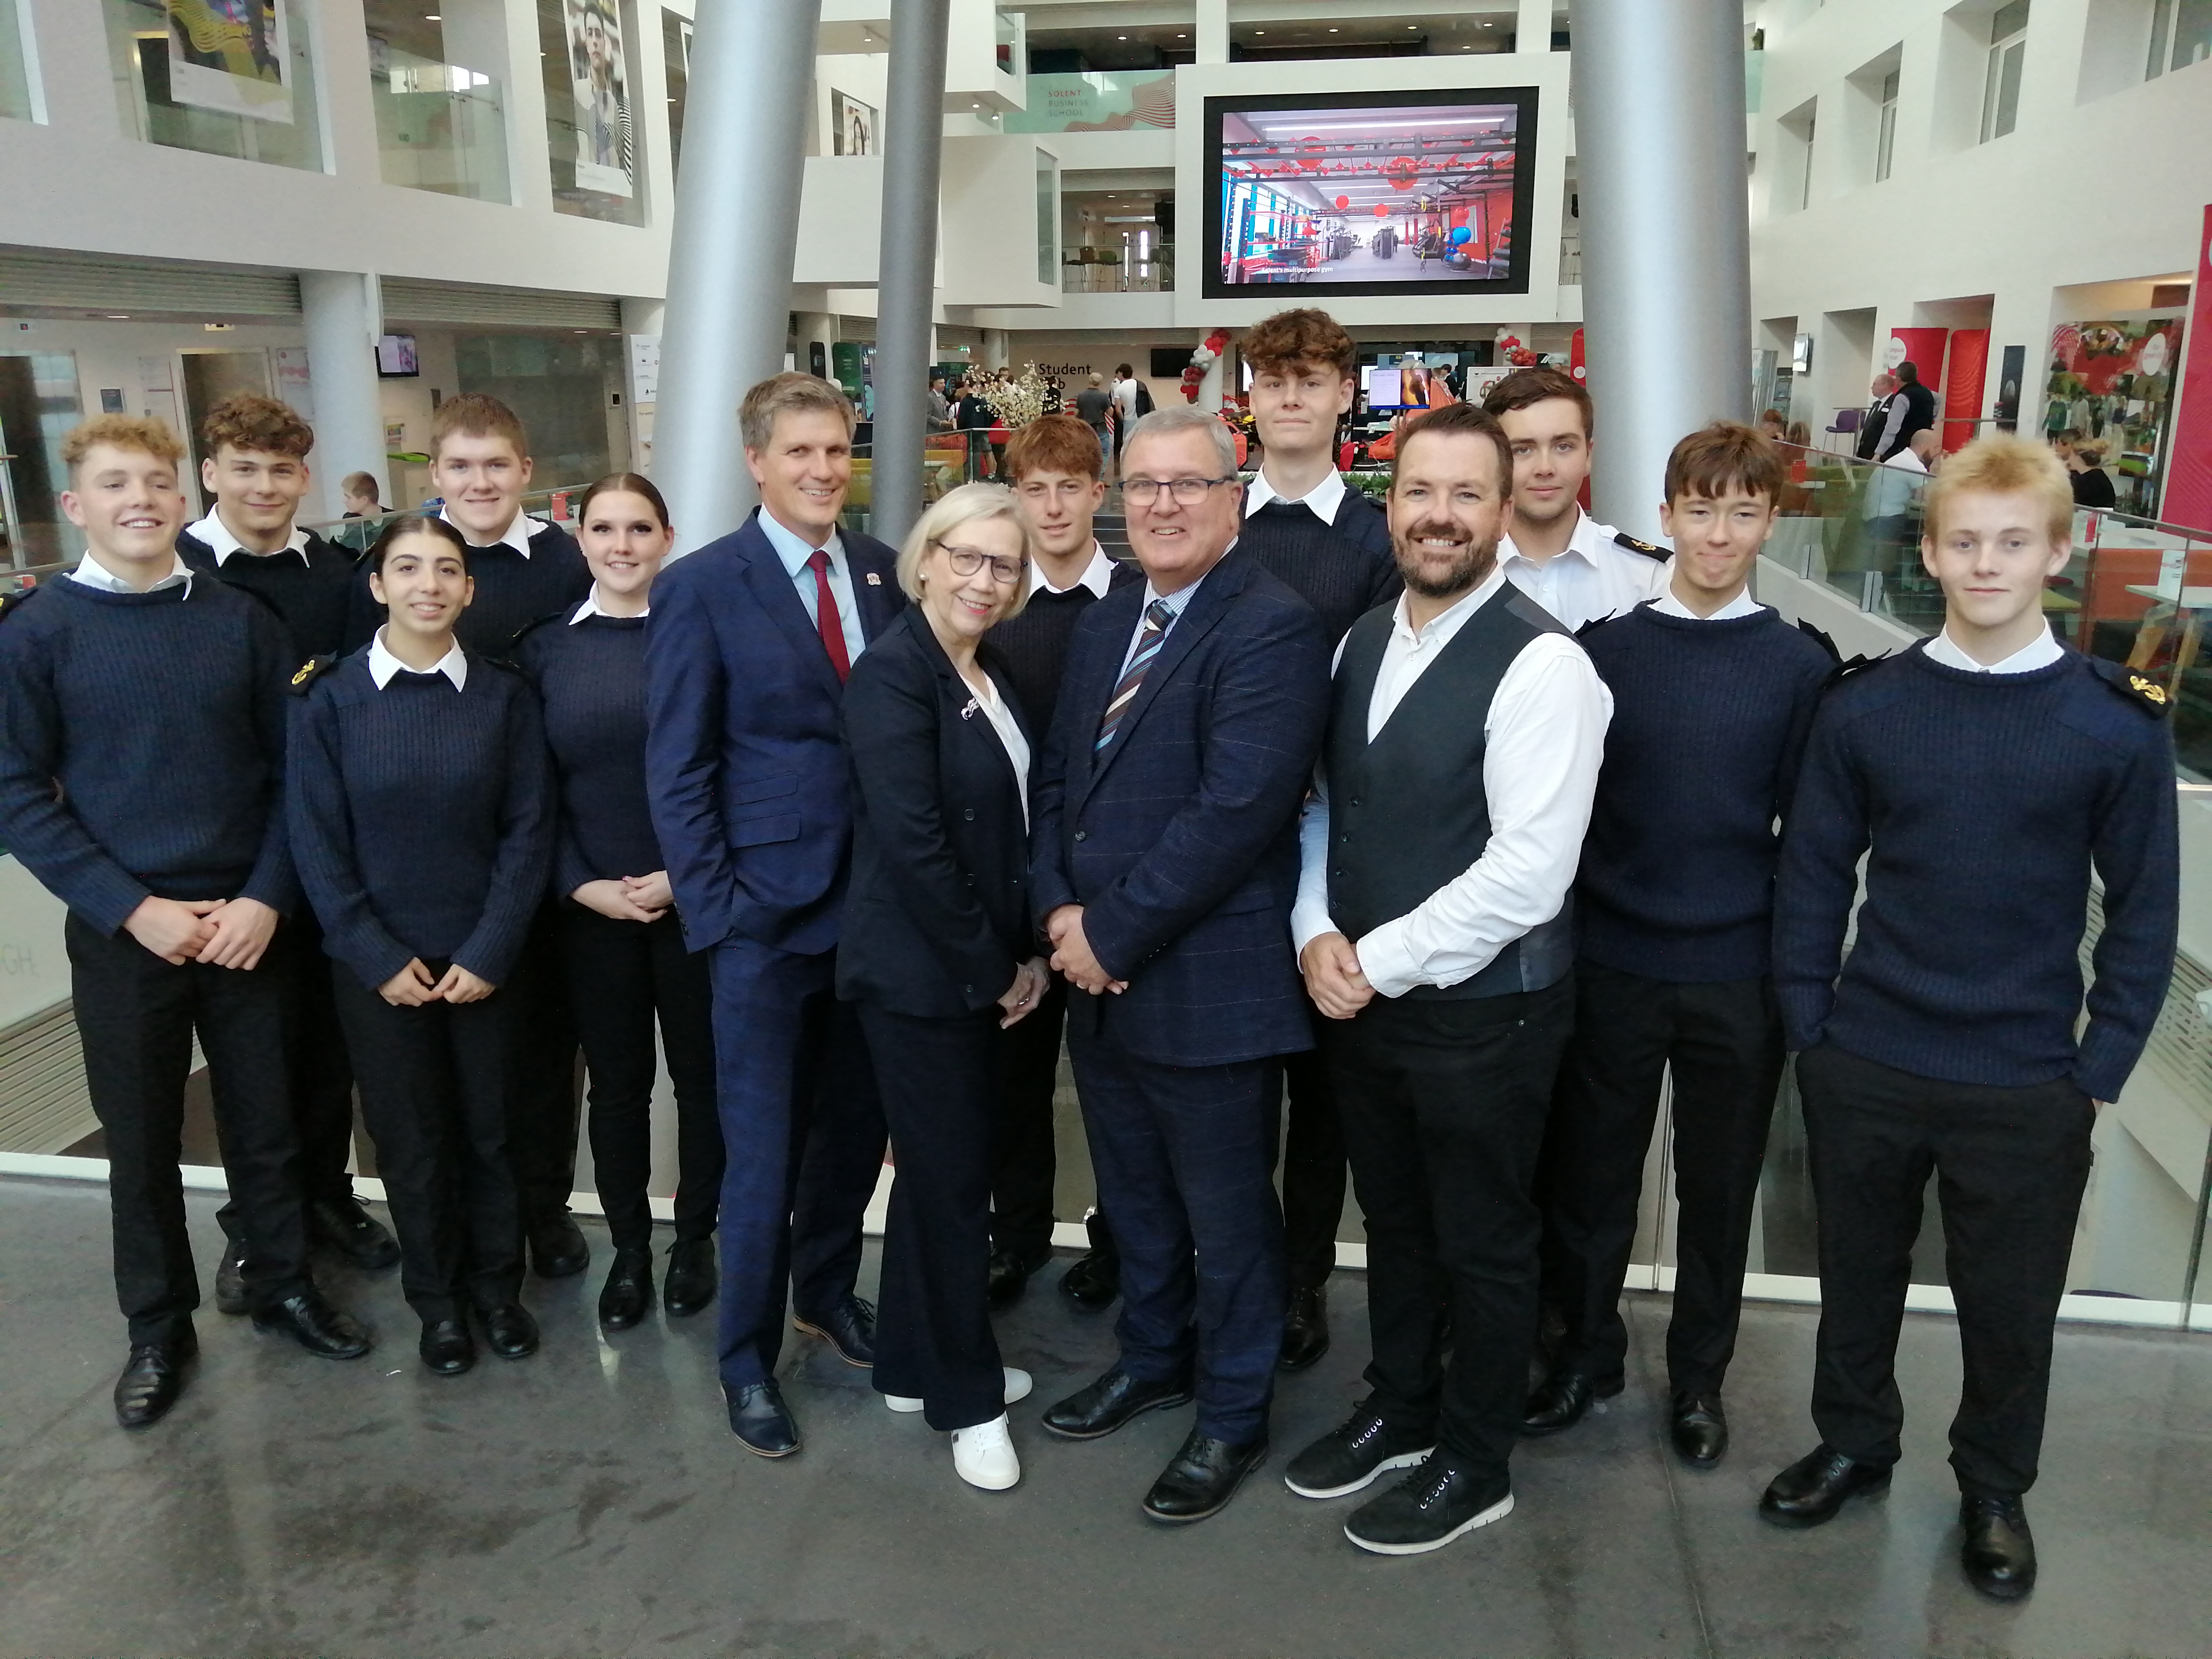 Pre-cadets and cadets in the Spark atrium